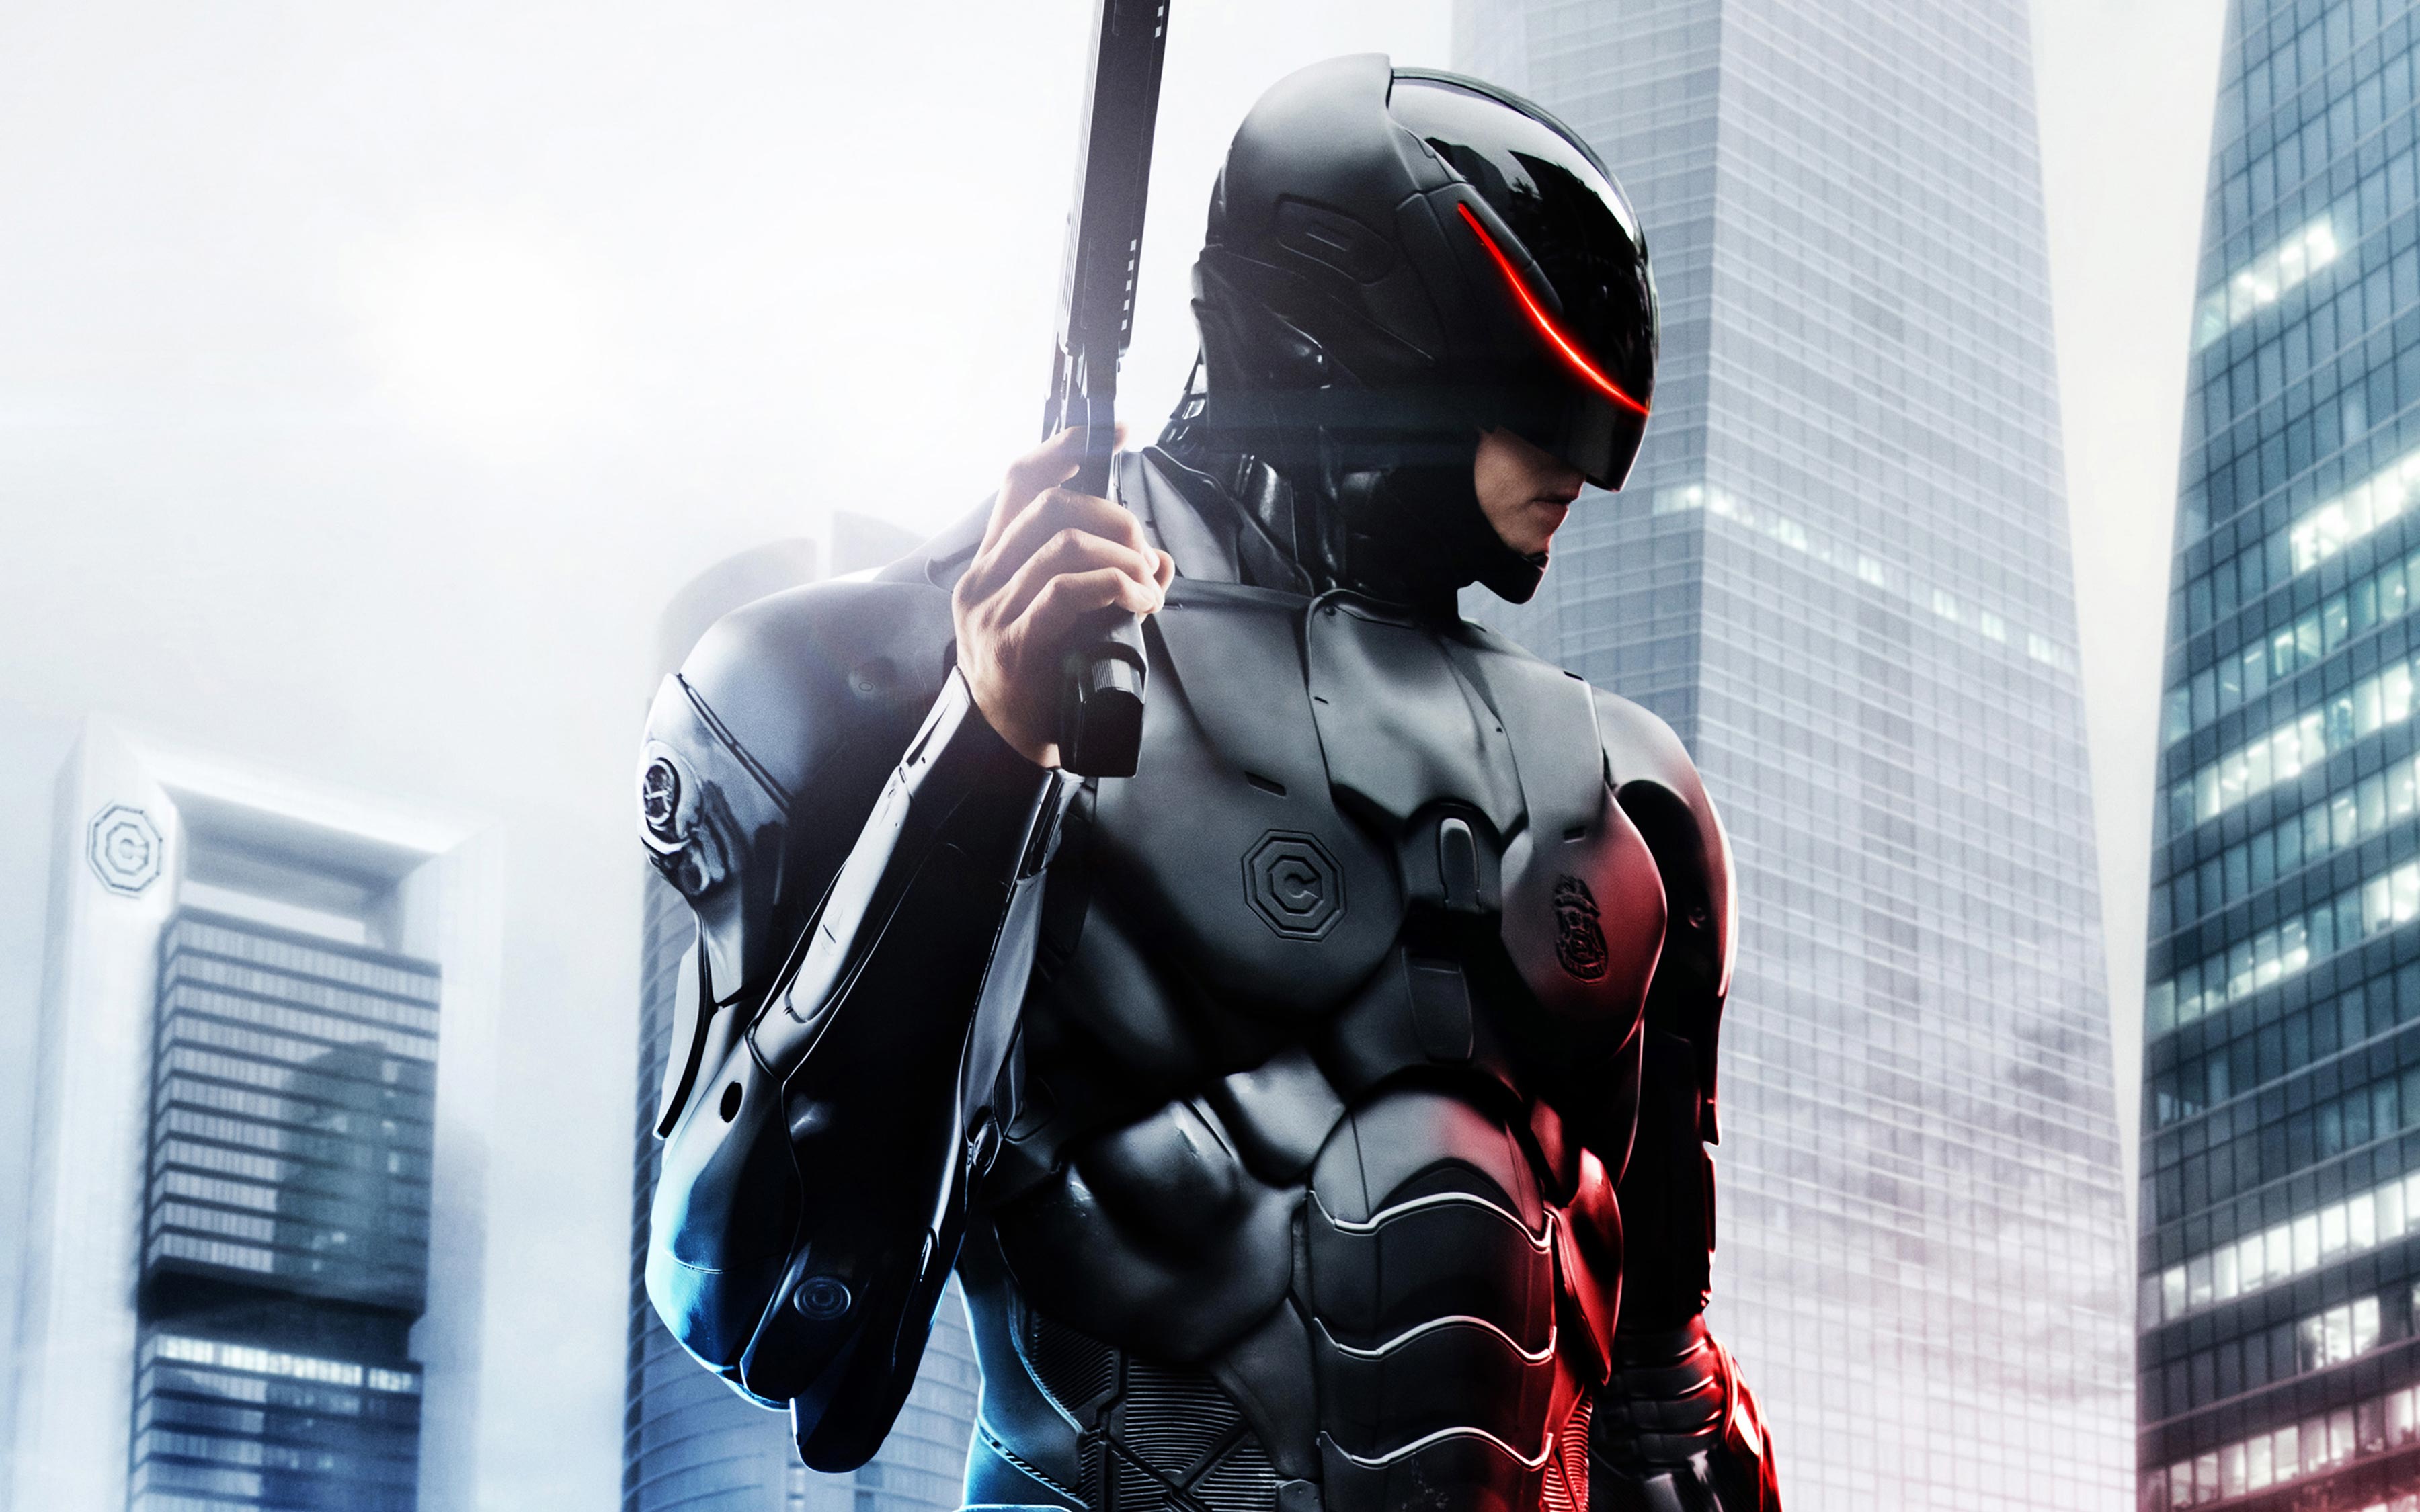 Robocop 2014 Movie Wallpapers [HD] Timeline Covers